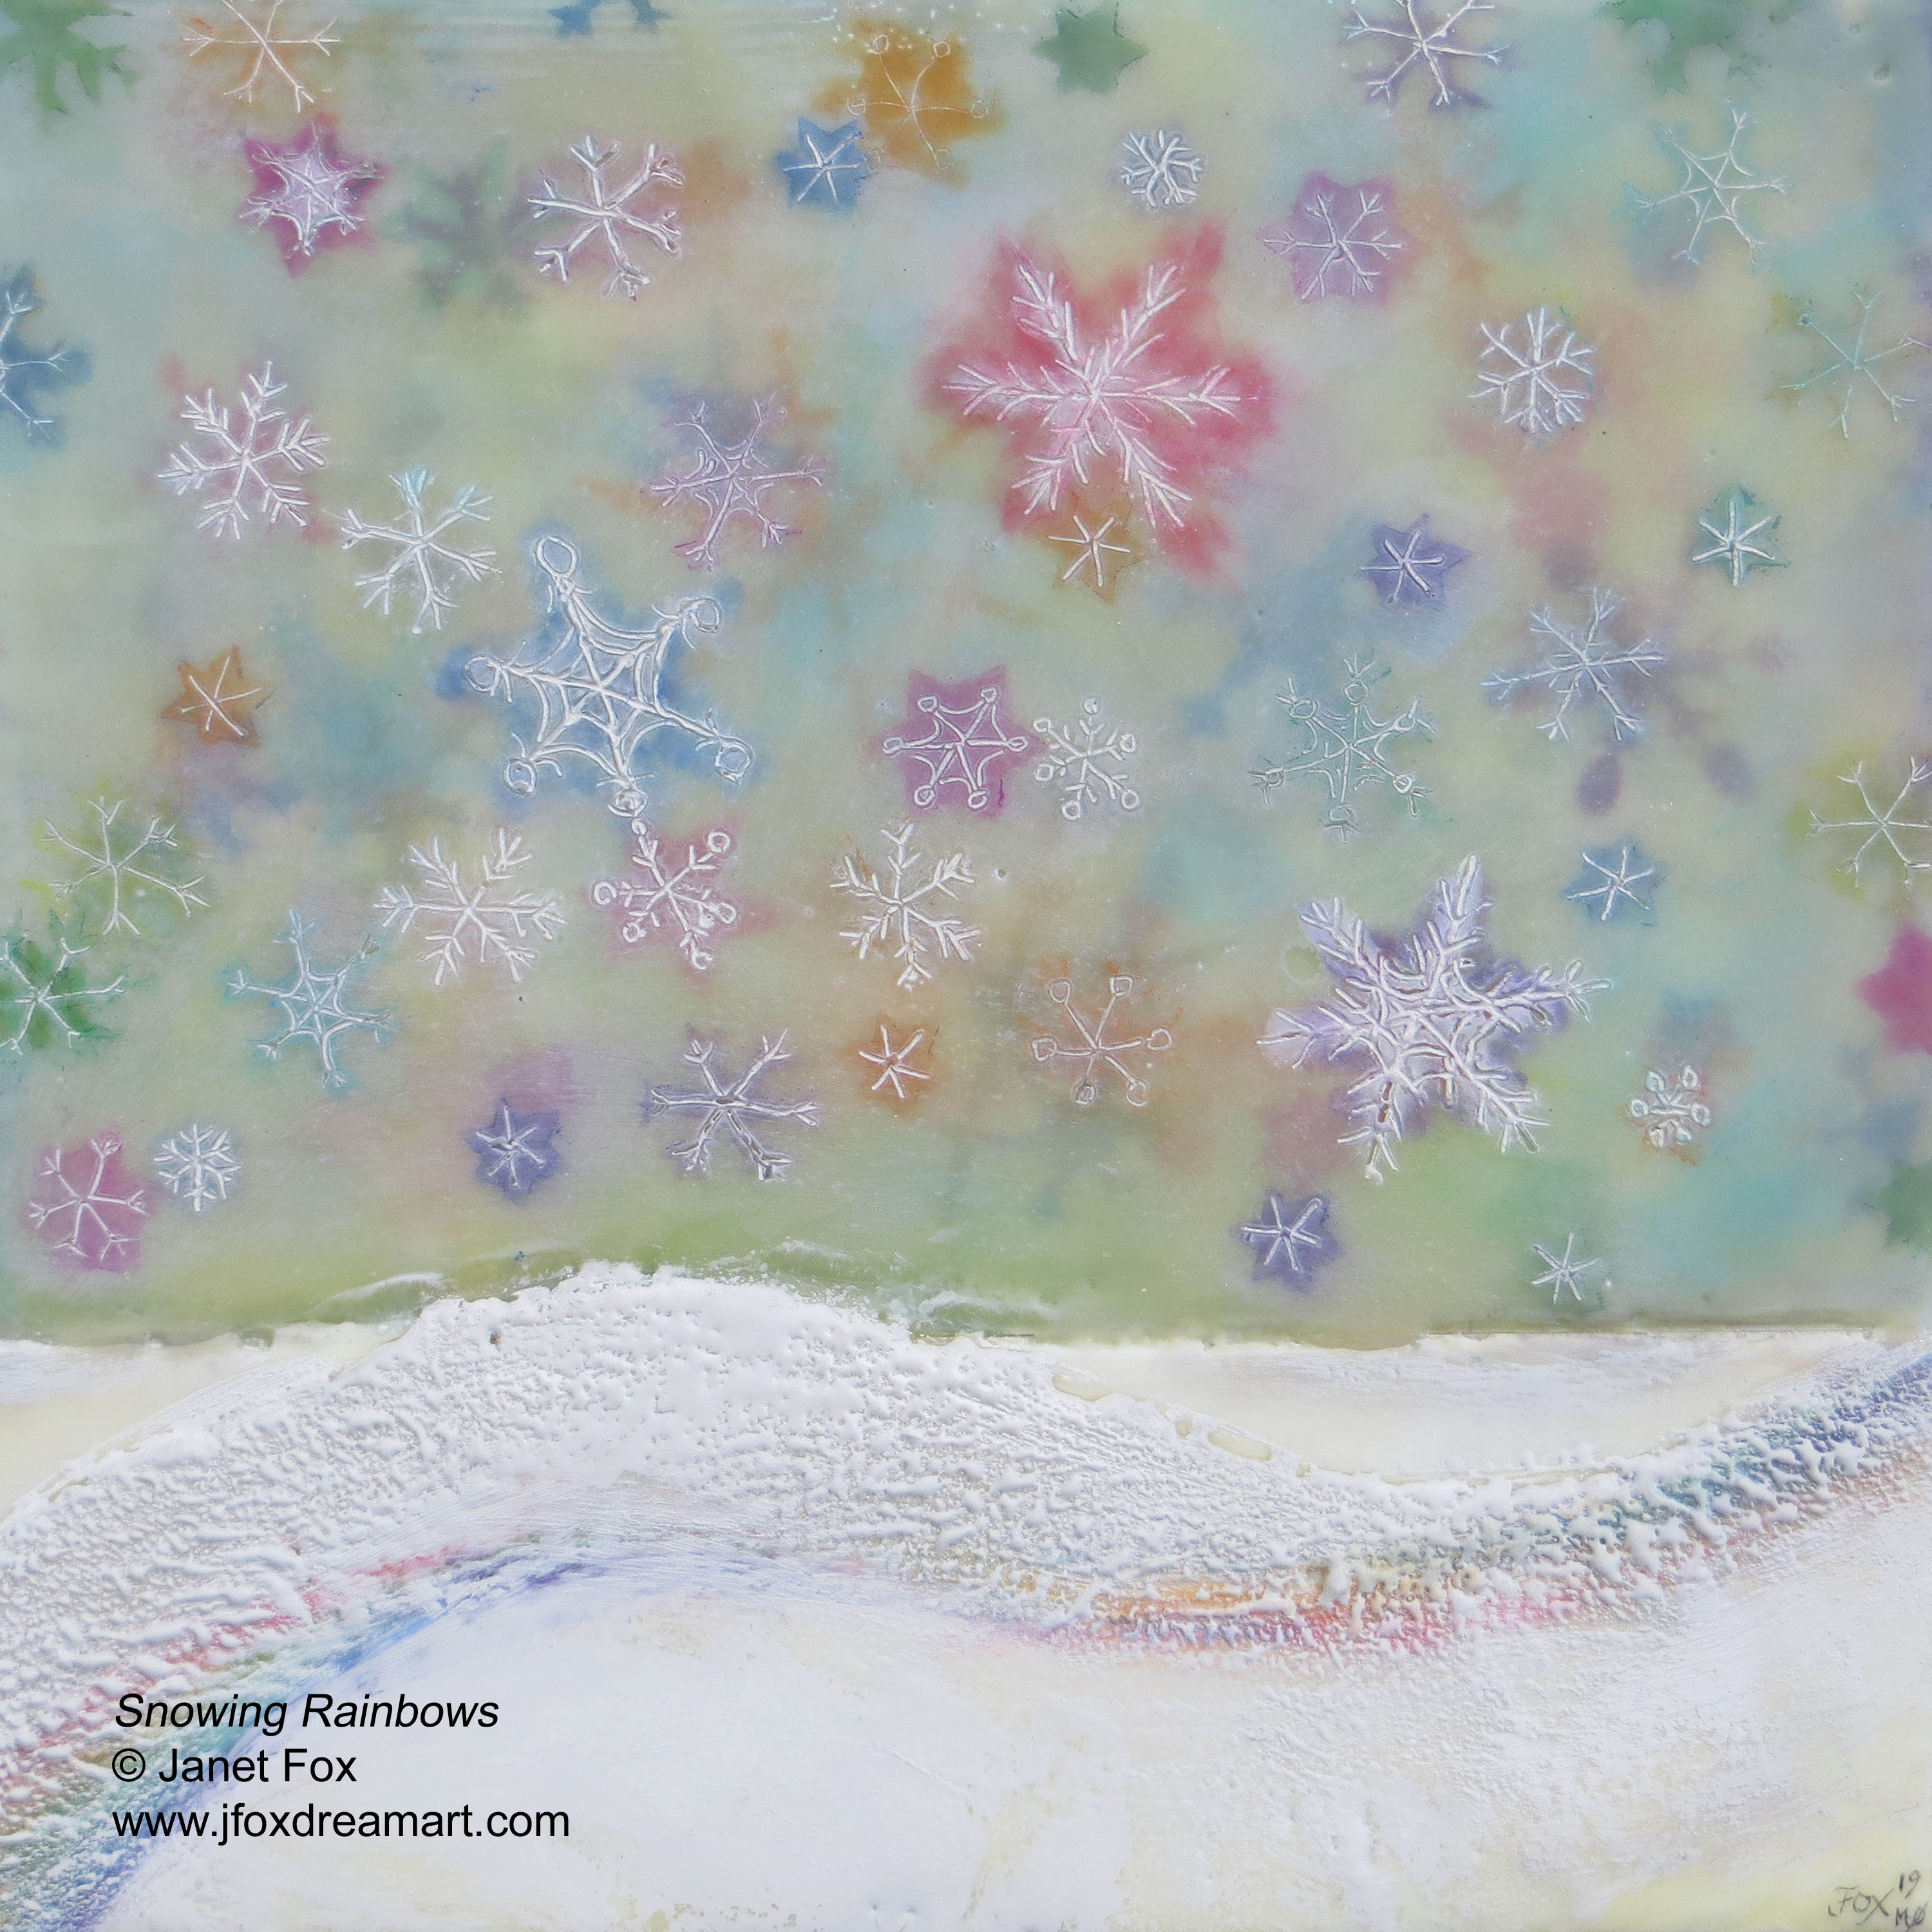 An encaustic painting "Snowing Rainbows" by Janet Fox shwith mlti sized colorful snowflakes falling onto a white and field with rainbow accents.